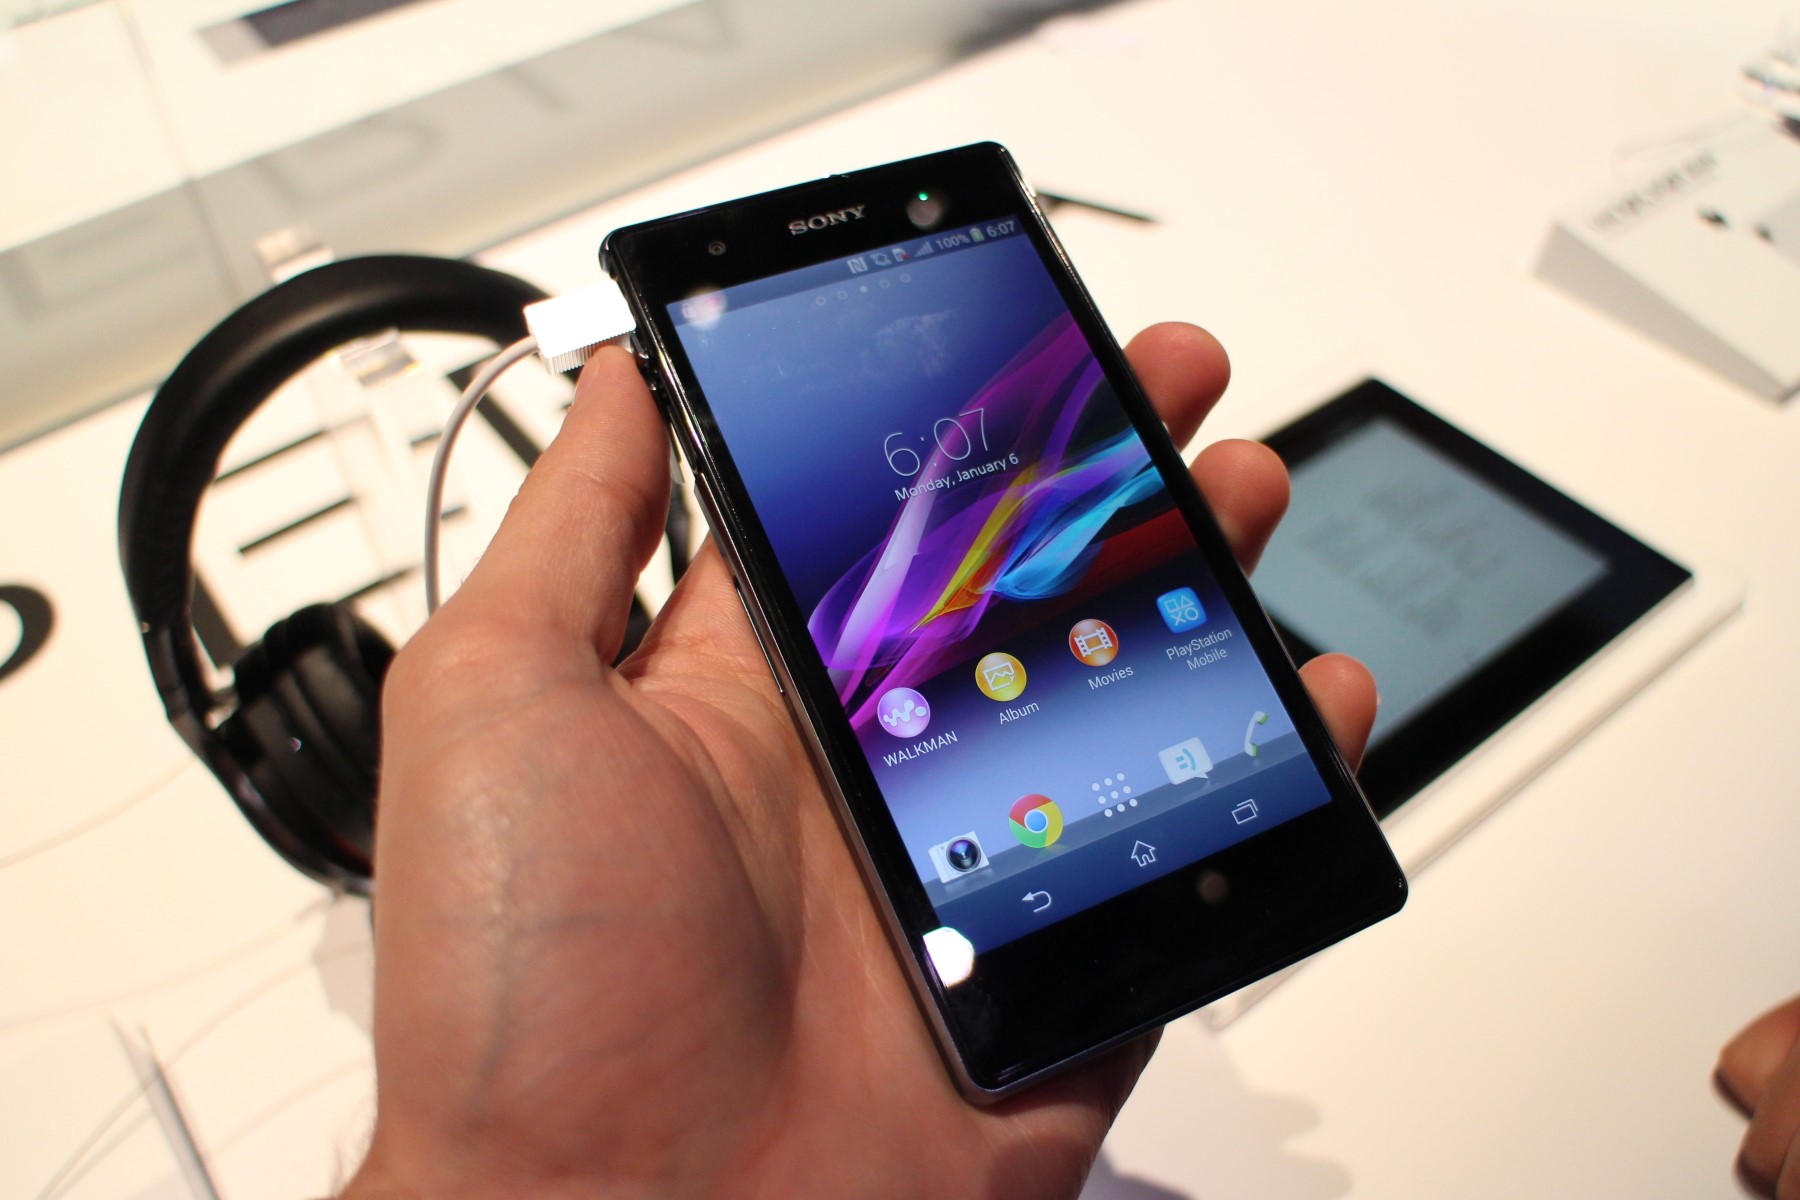 unlocking-xperia-z-t-mobile-a-quick-how-to-guide